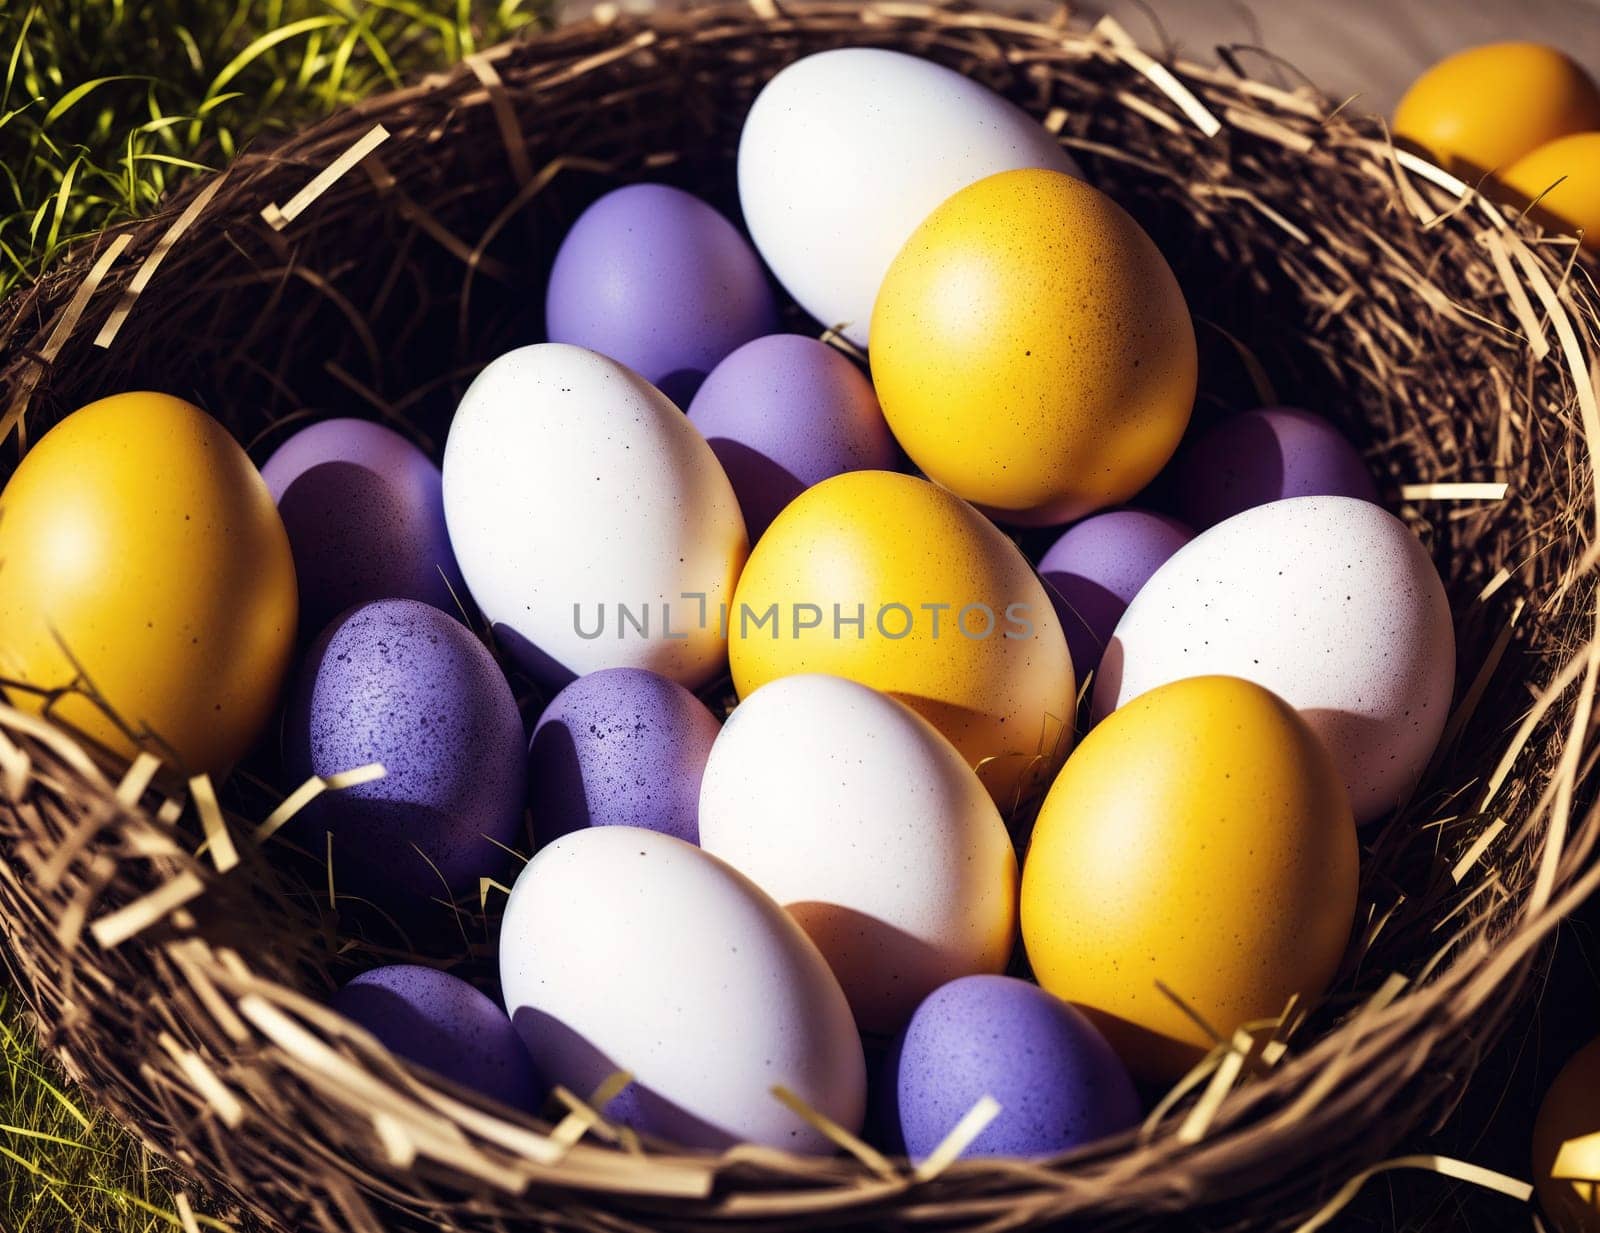 The image shows a basket filled with various colored eggs.